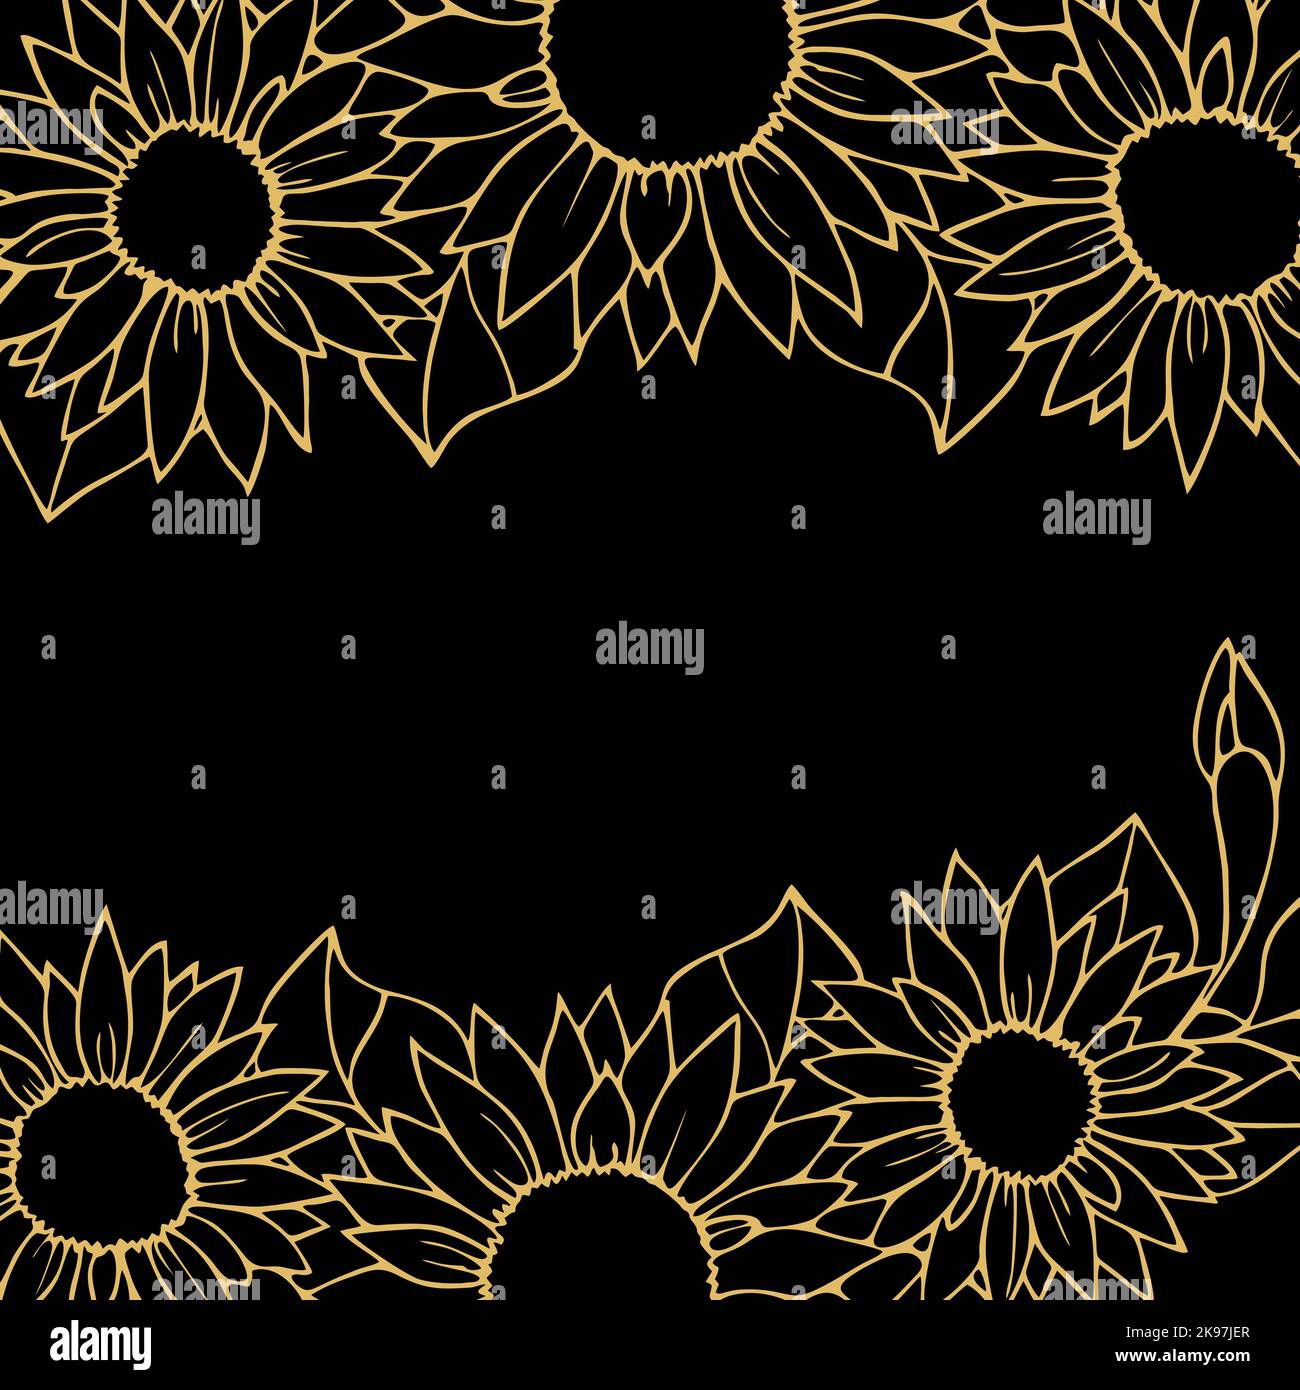 floral graphic border, gold pattern on black background, greeting card, design Stock Photo